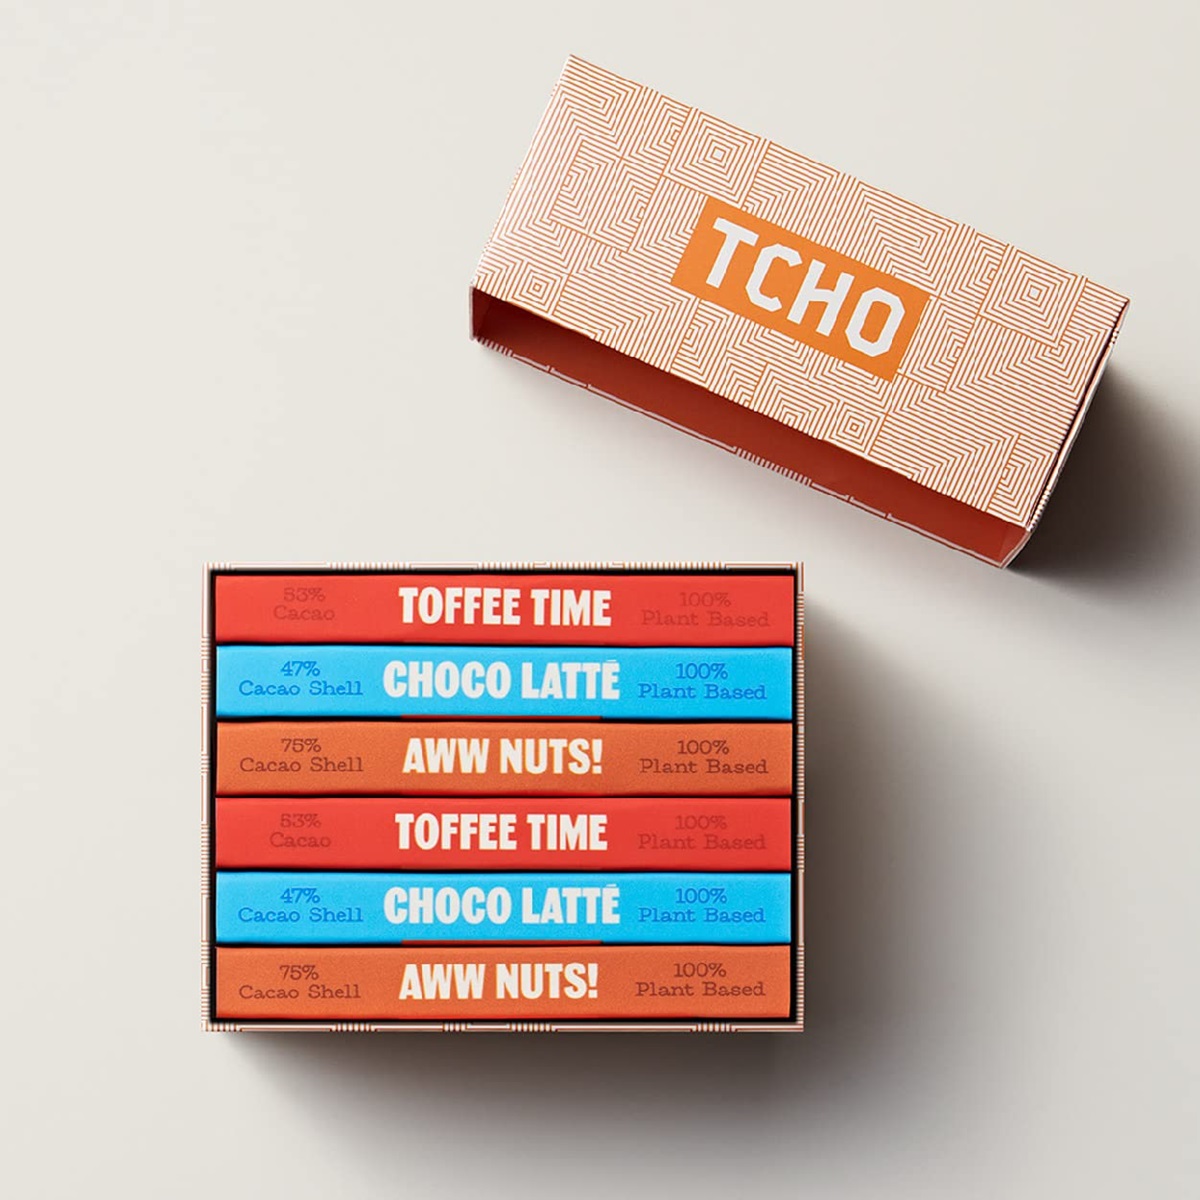 TCHO Dairy-Free Chocolate Gift Boxes